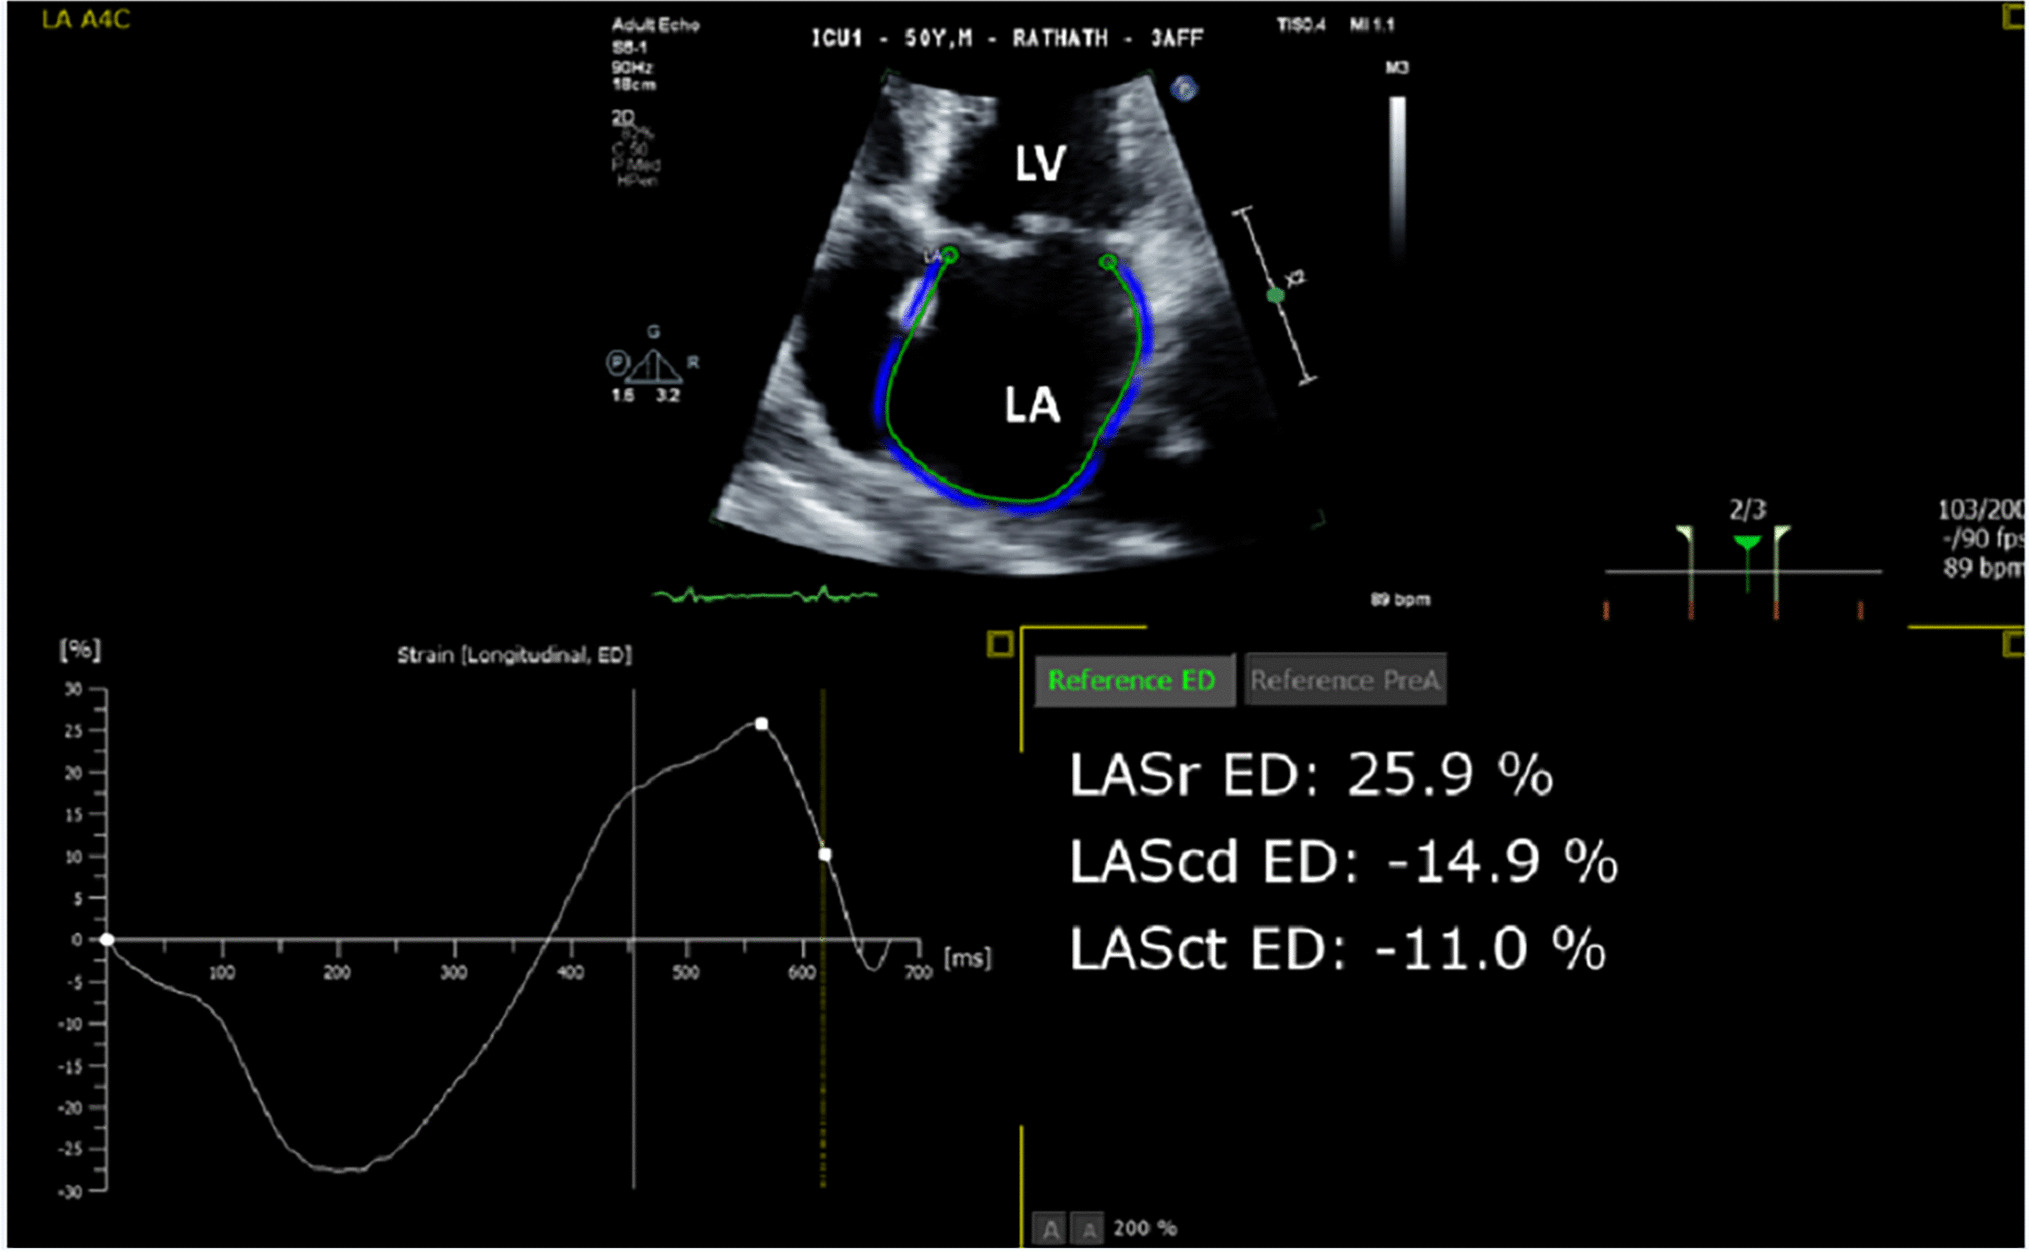 Incremental diagnostic and prognostic utility of left atrial deformation in heart failure using speckle tracking echocardiography